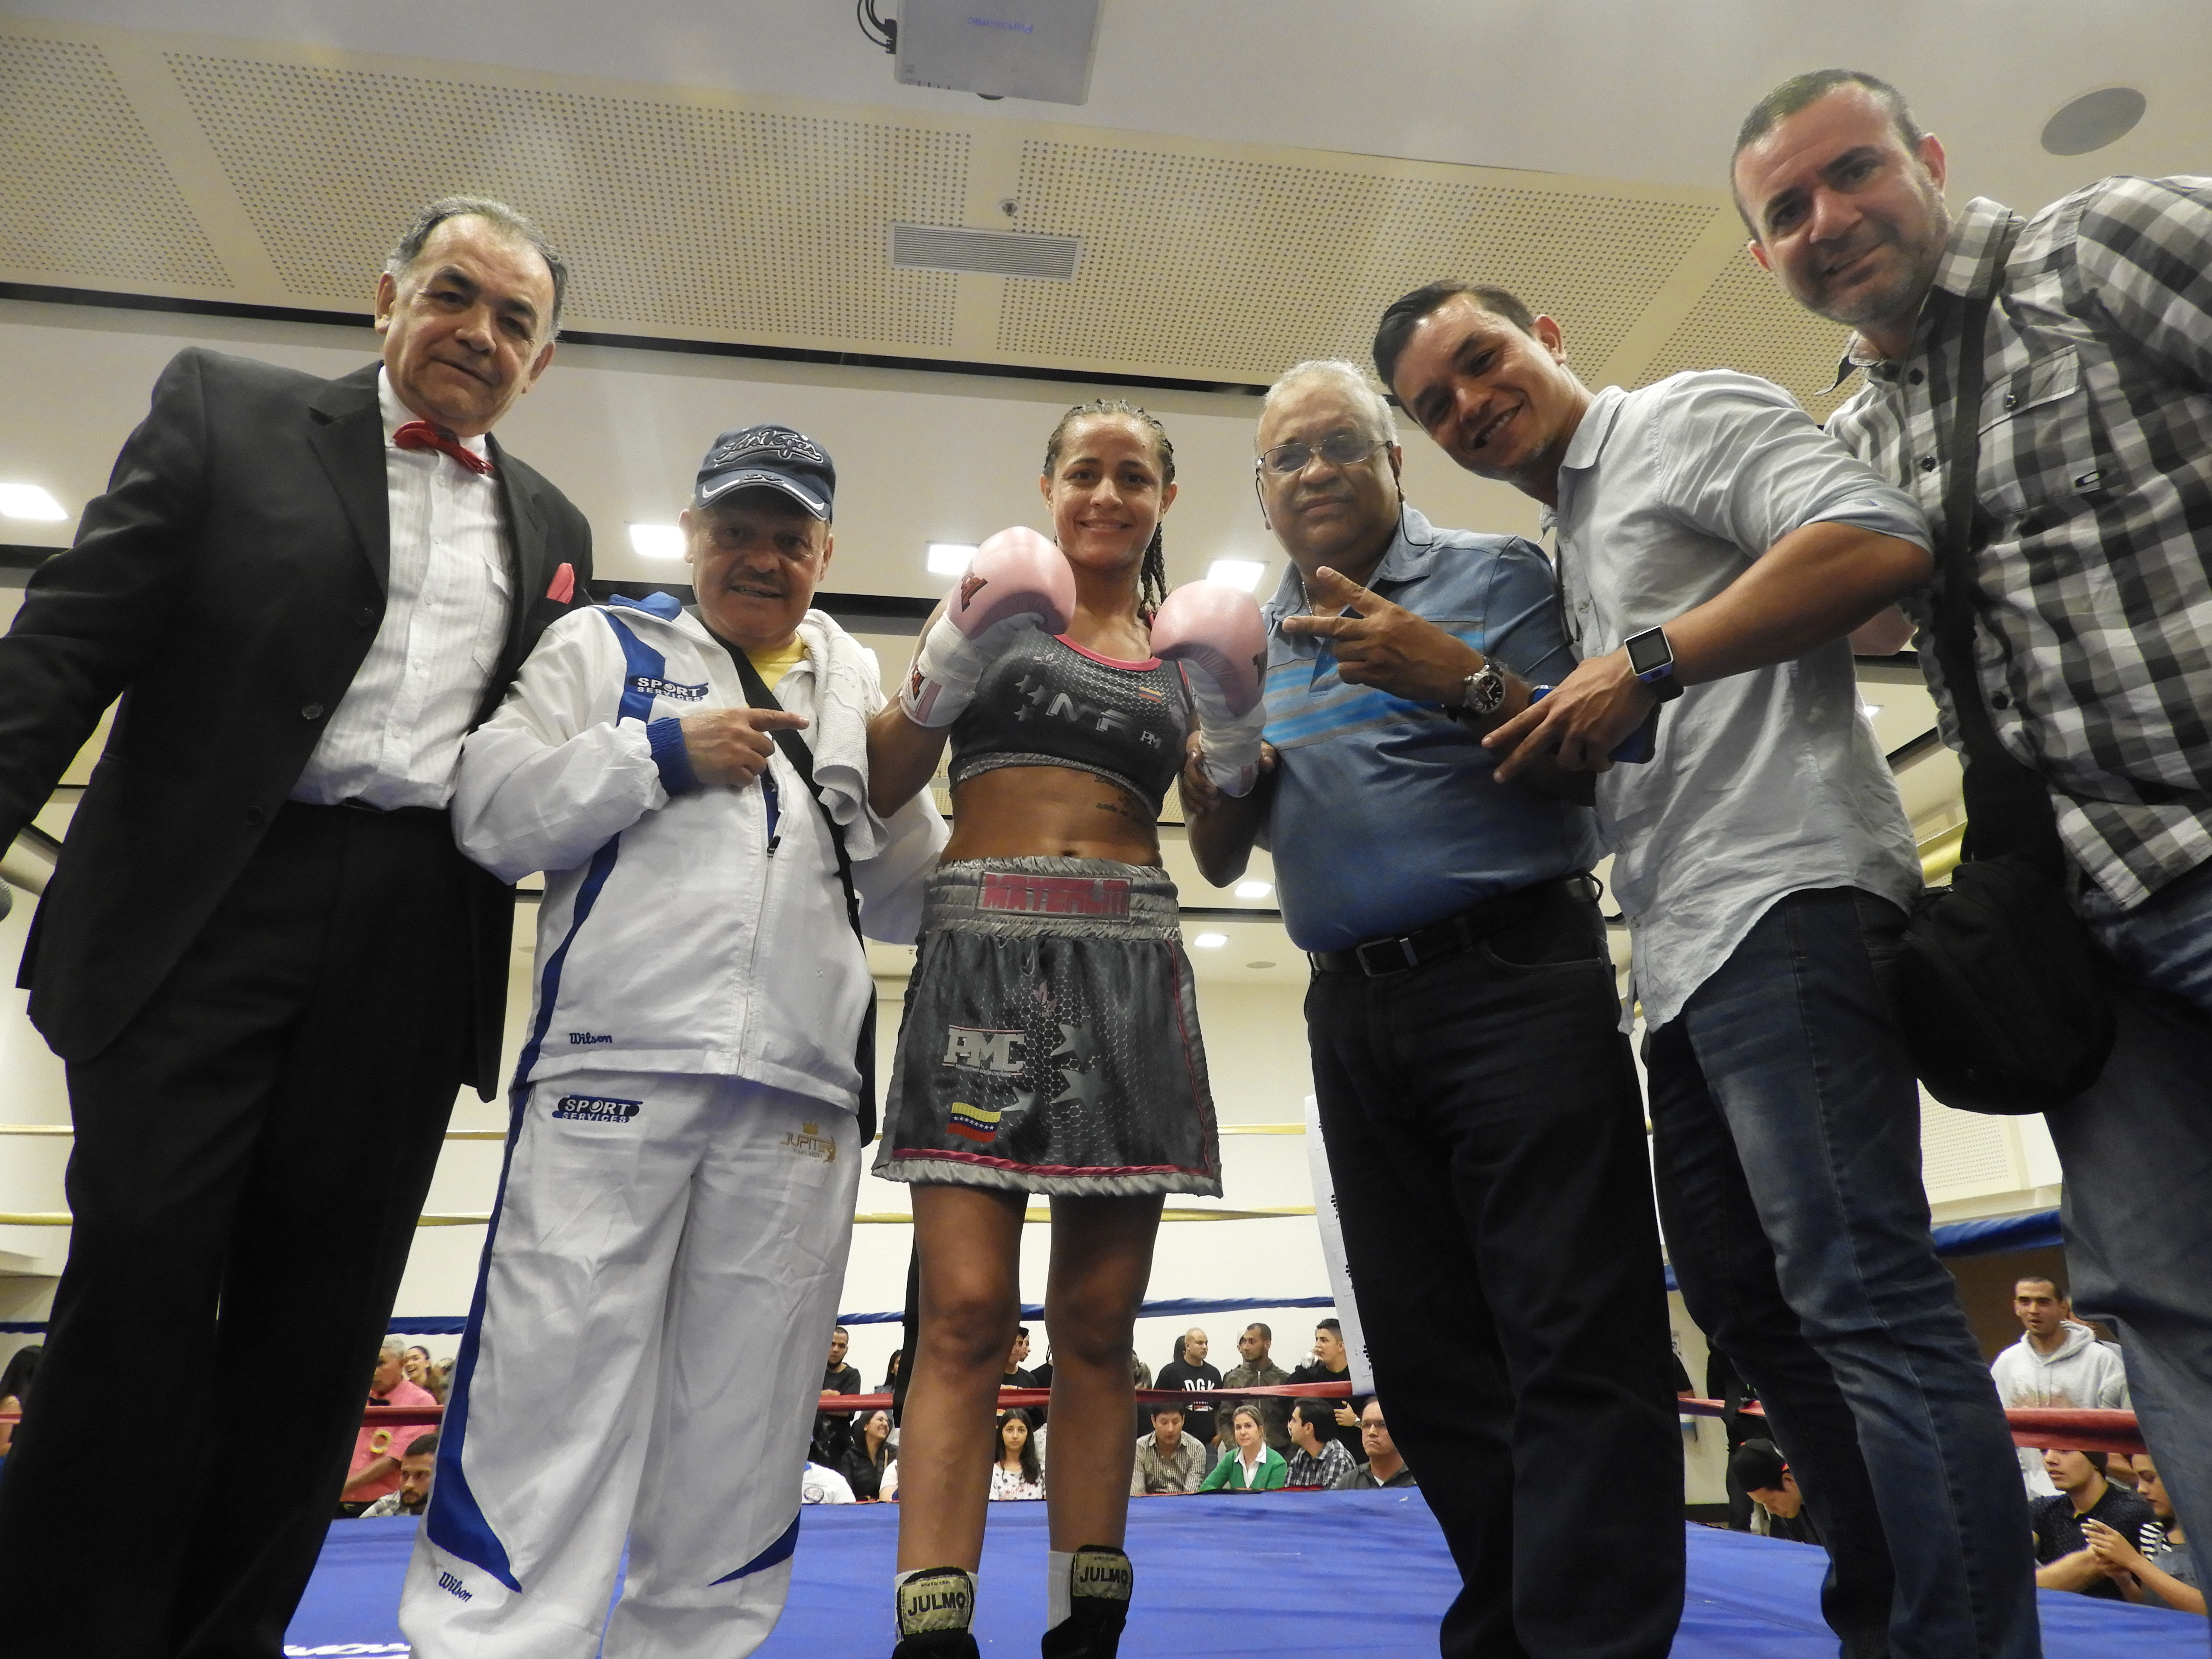 Medellin enjoyed a night of professional Boxing